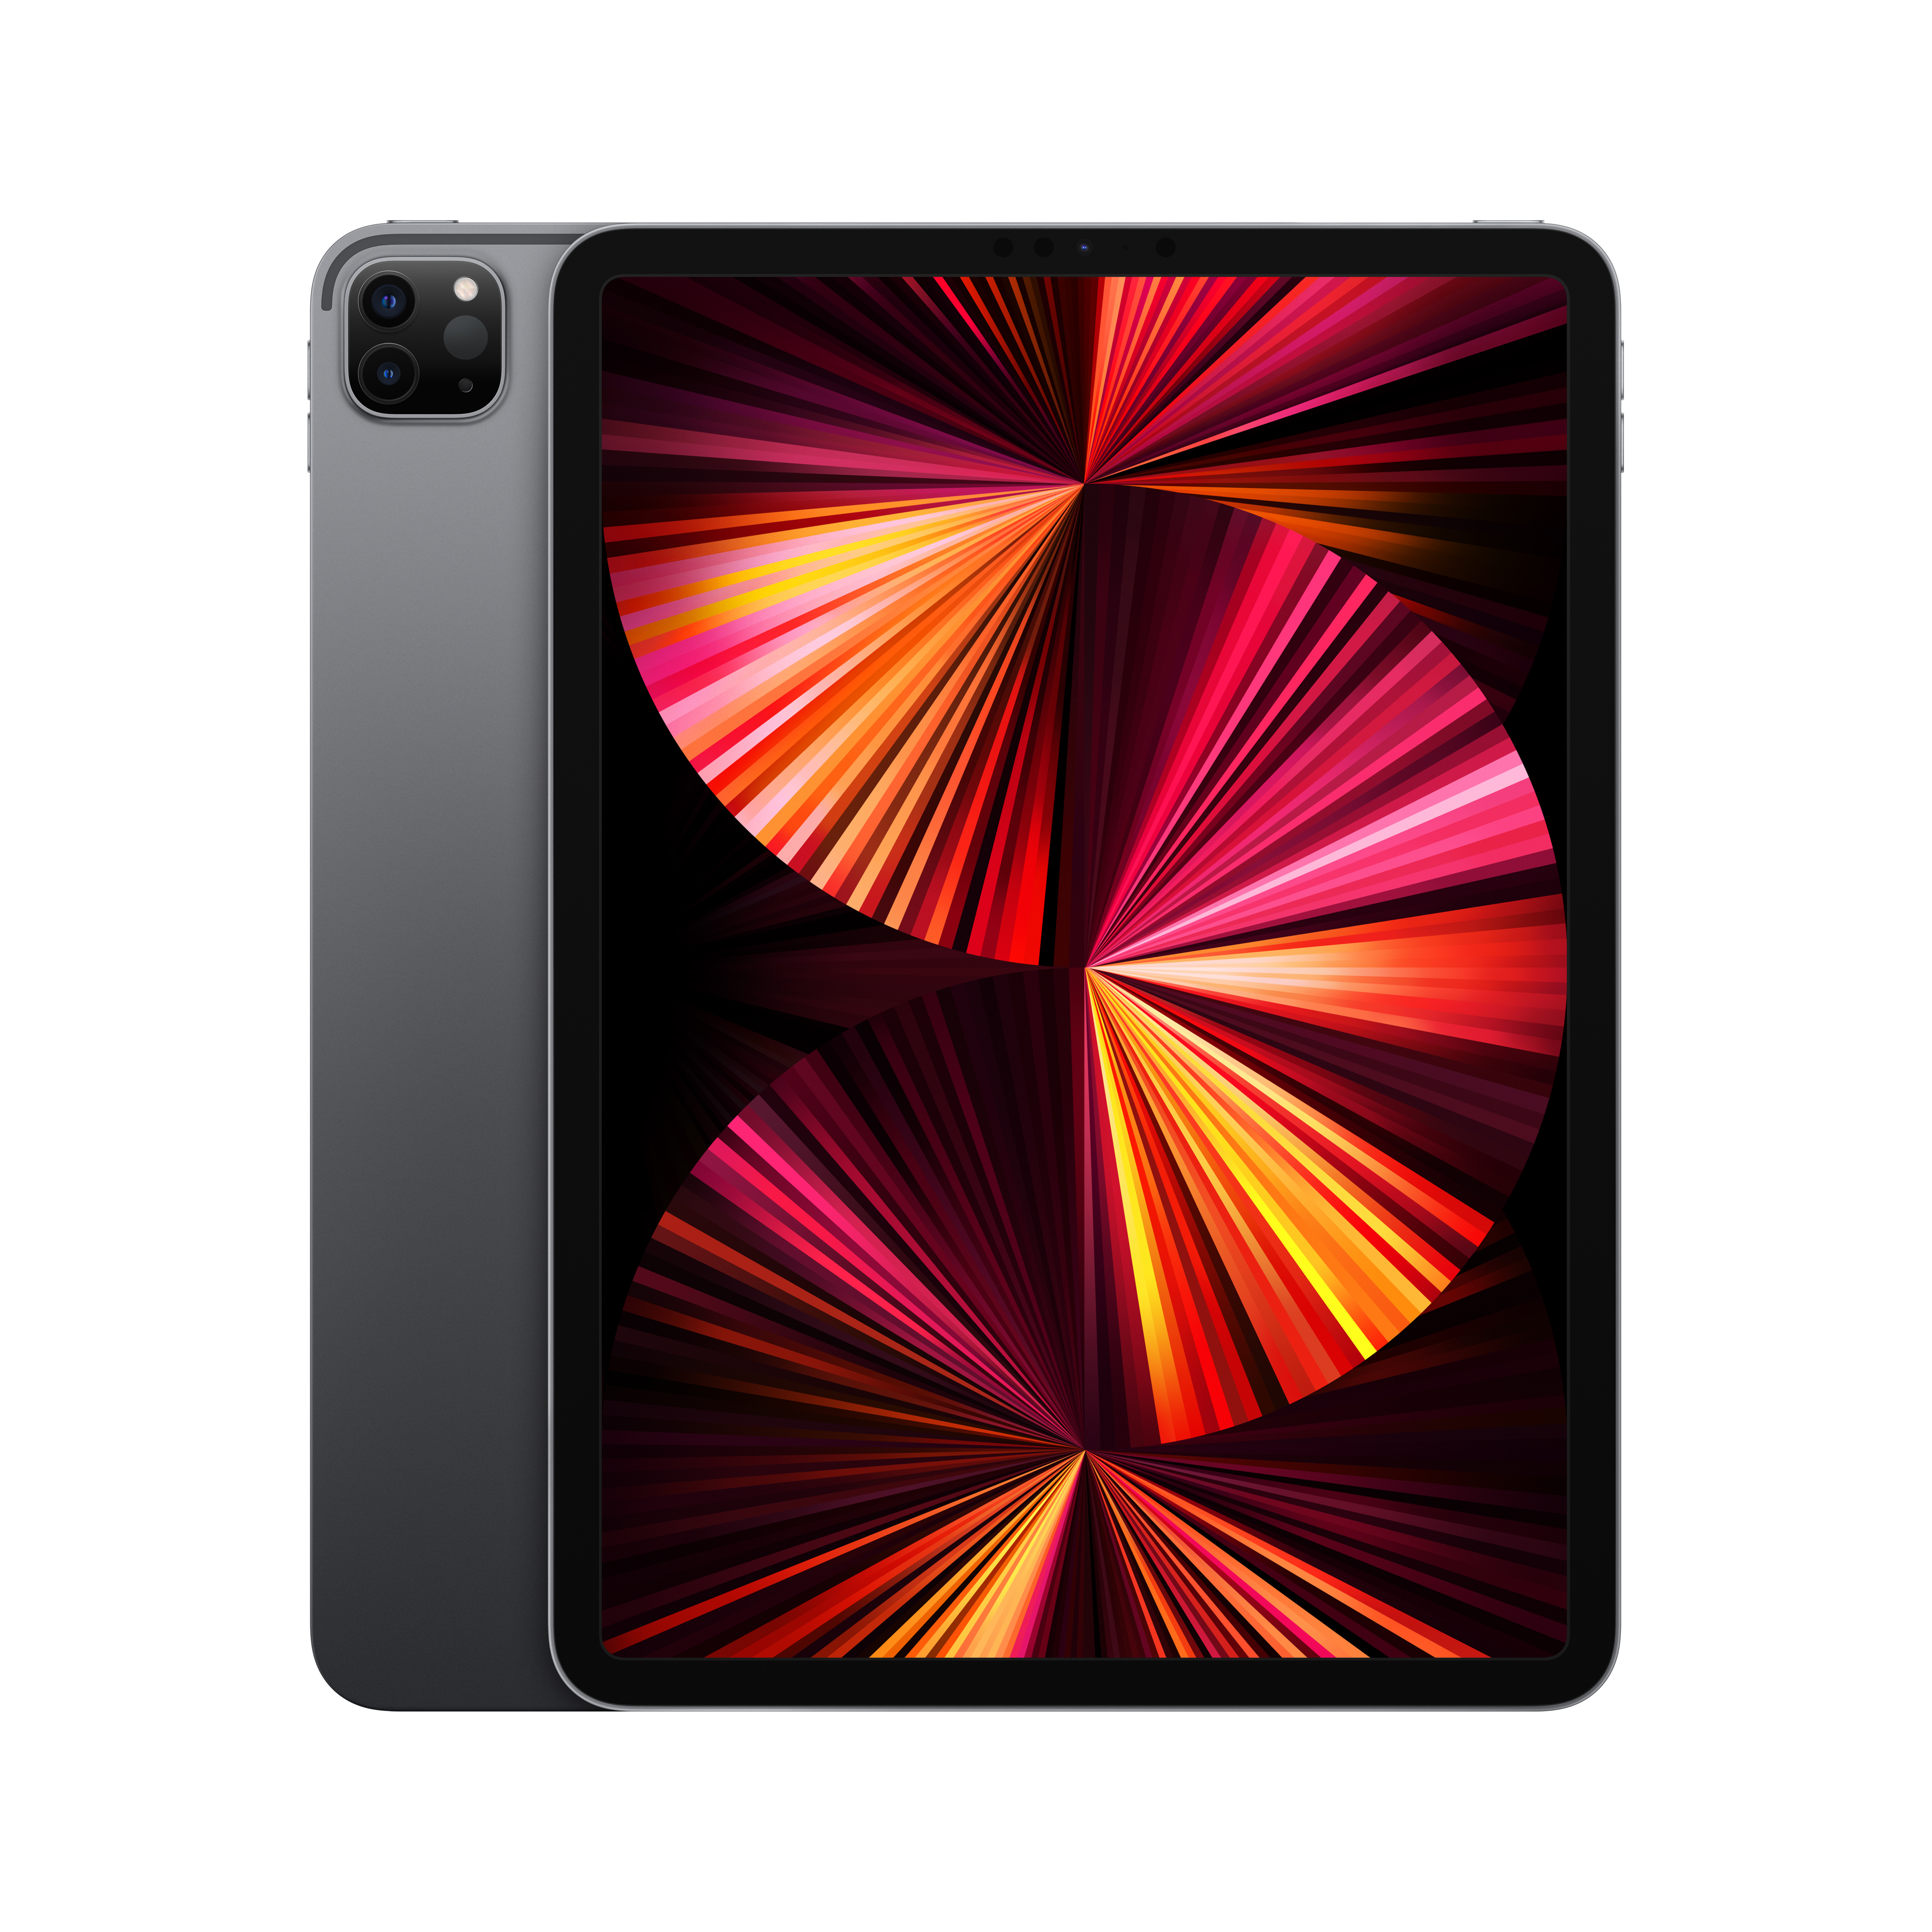 2021 Apple 11-inch iPad Pro Wi-Fi + Cellular 256GB - Space Gray (3rd Generation) - image 1 of 9